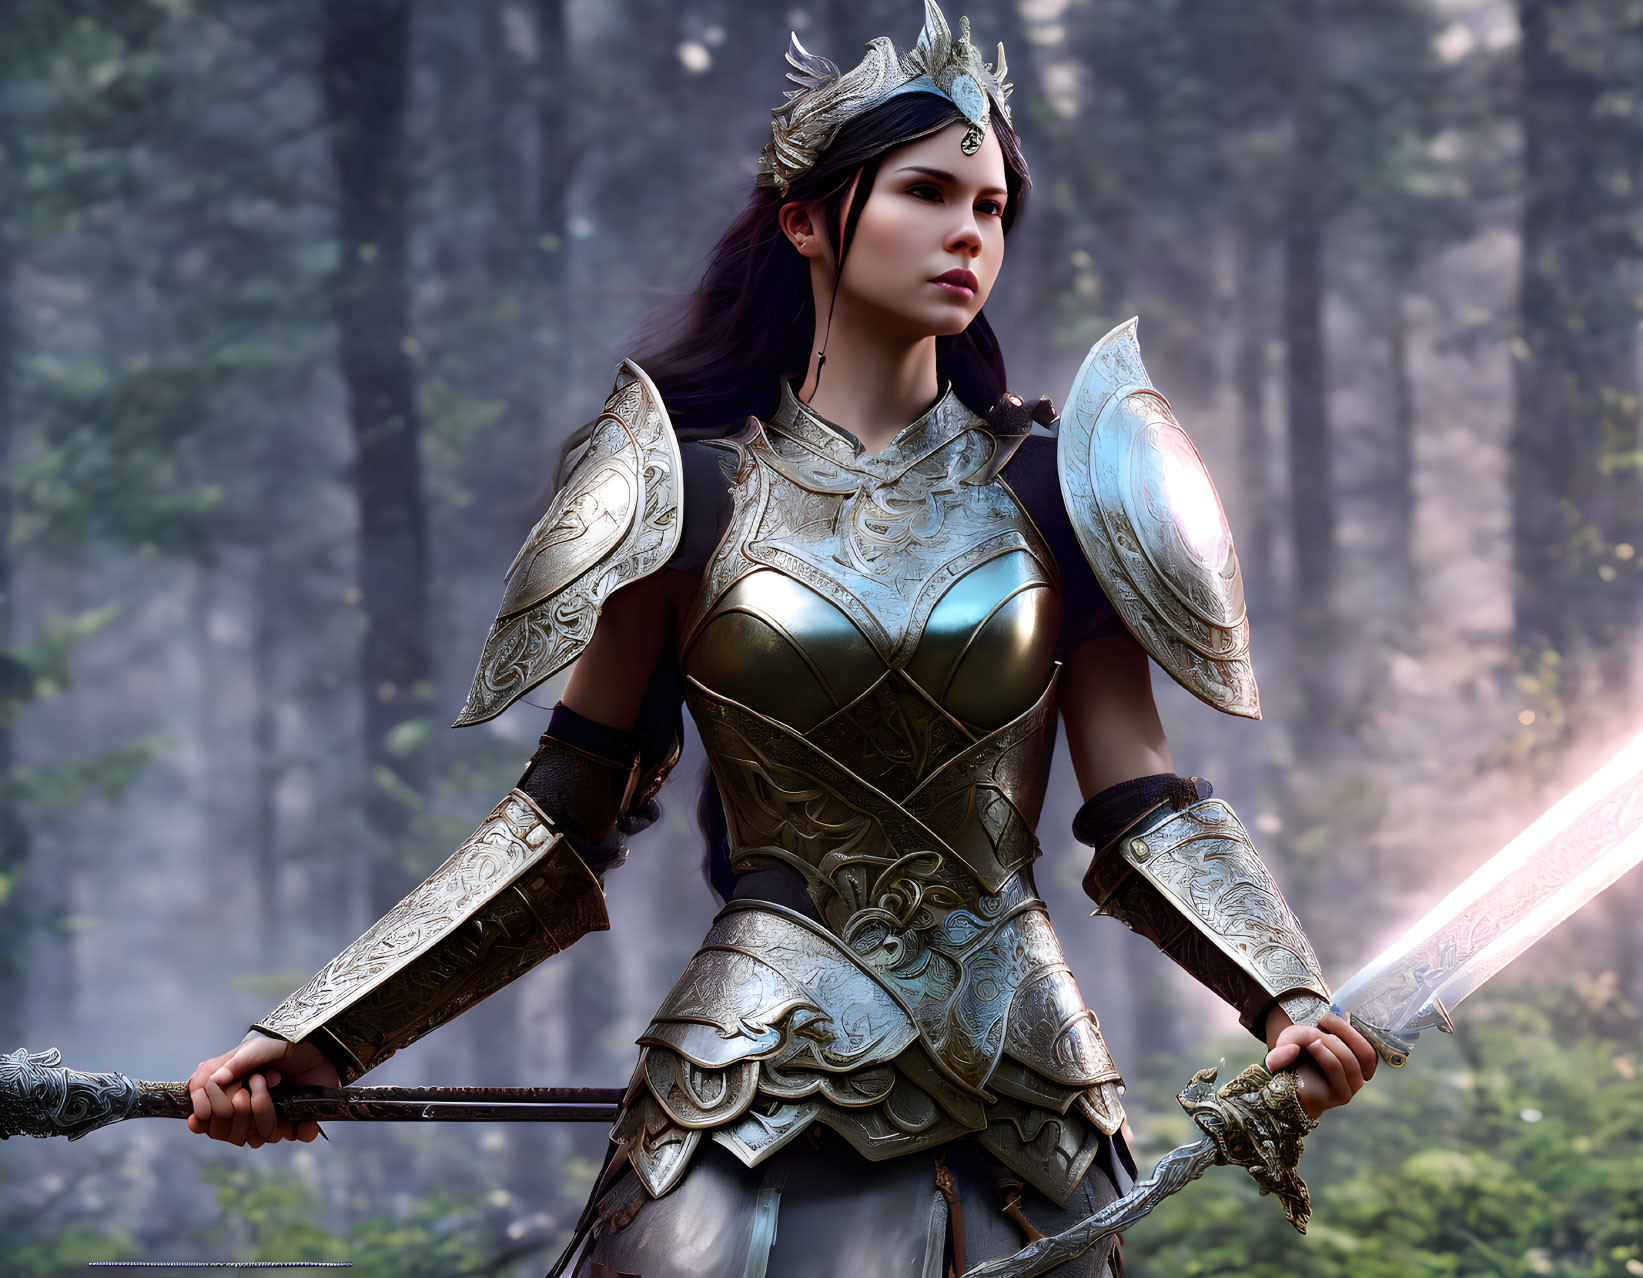 Female warrior in ornate armor with sword and shield in forest setting.